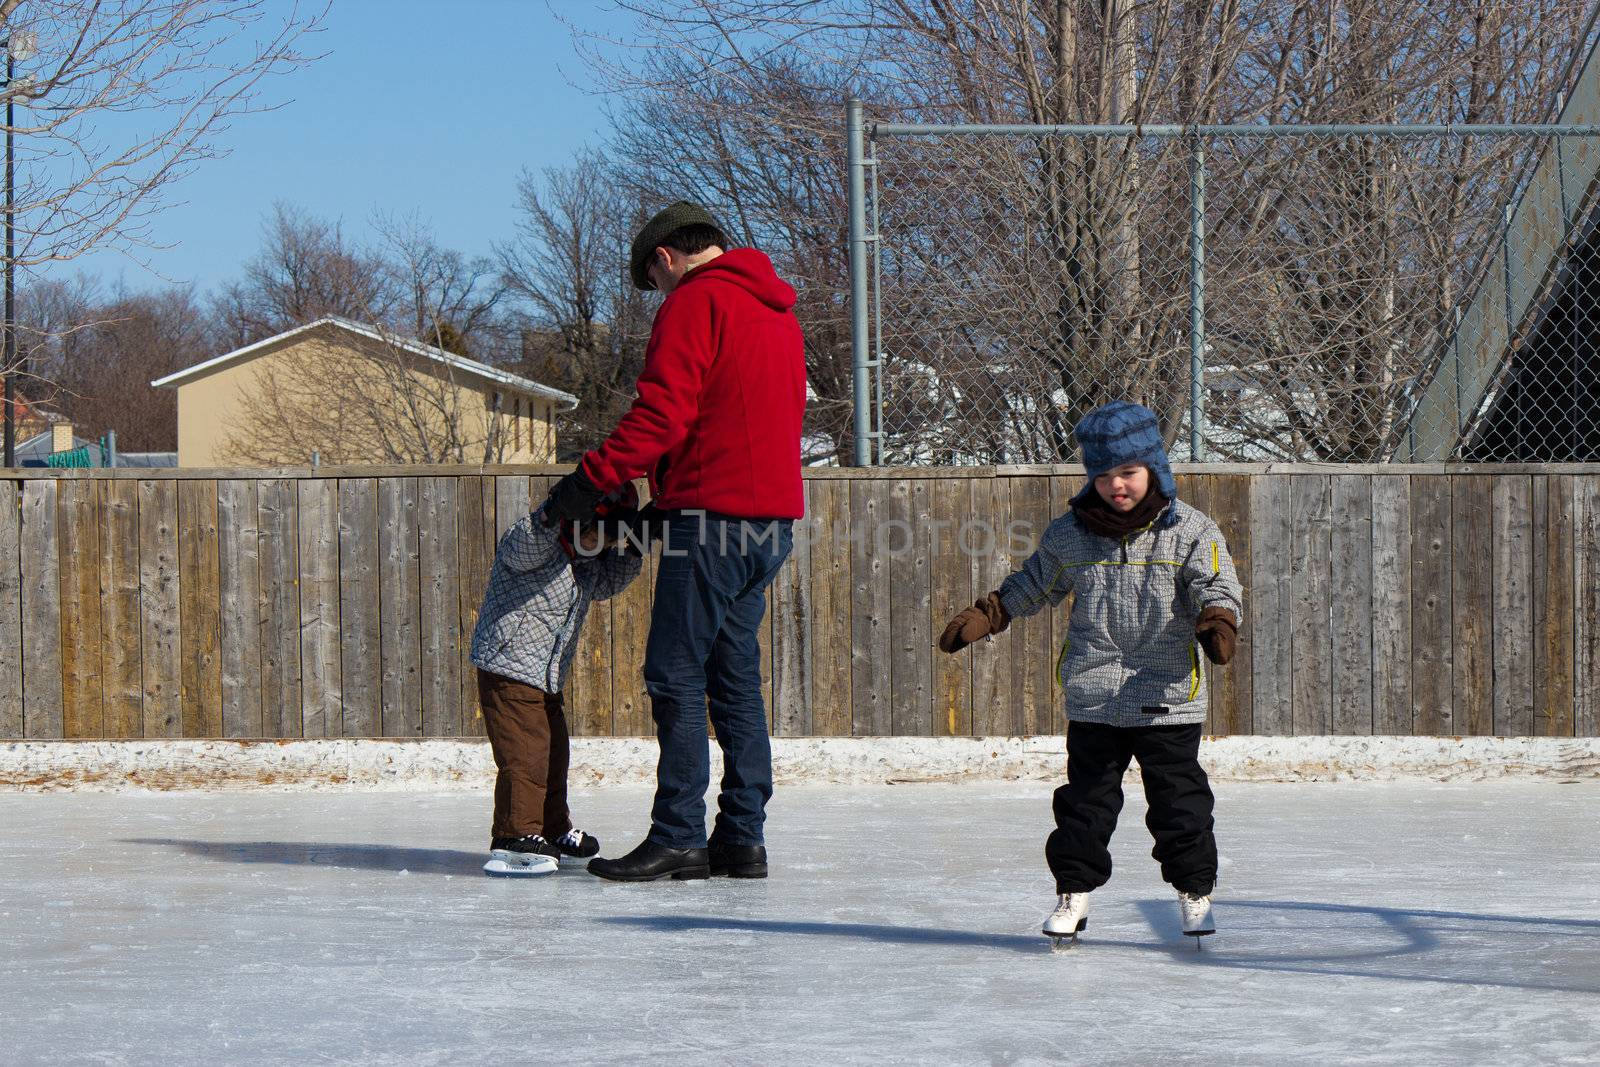 Father with son and daughter playing at the skating rink in winter.